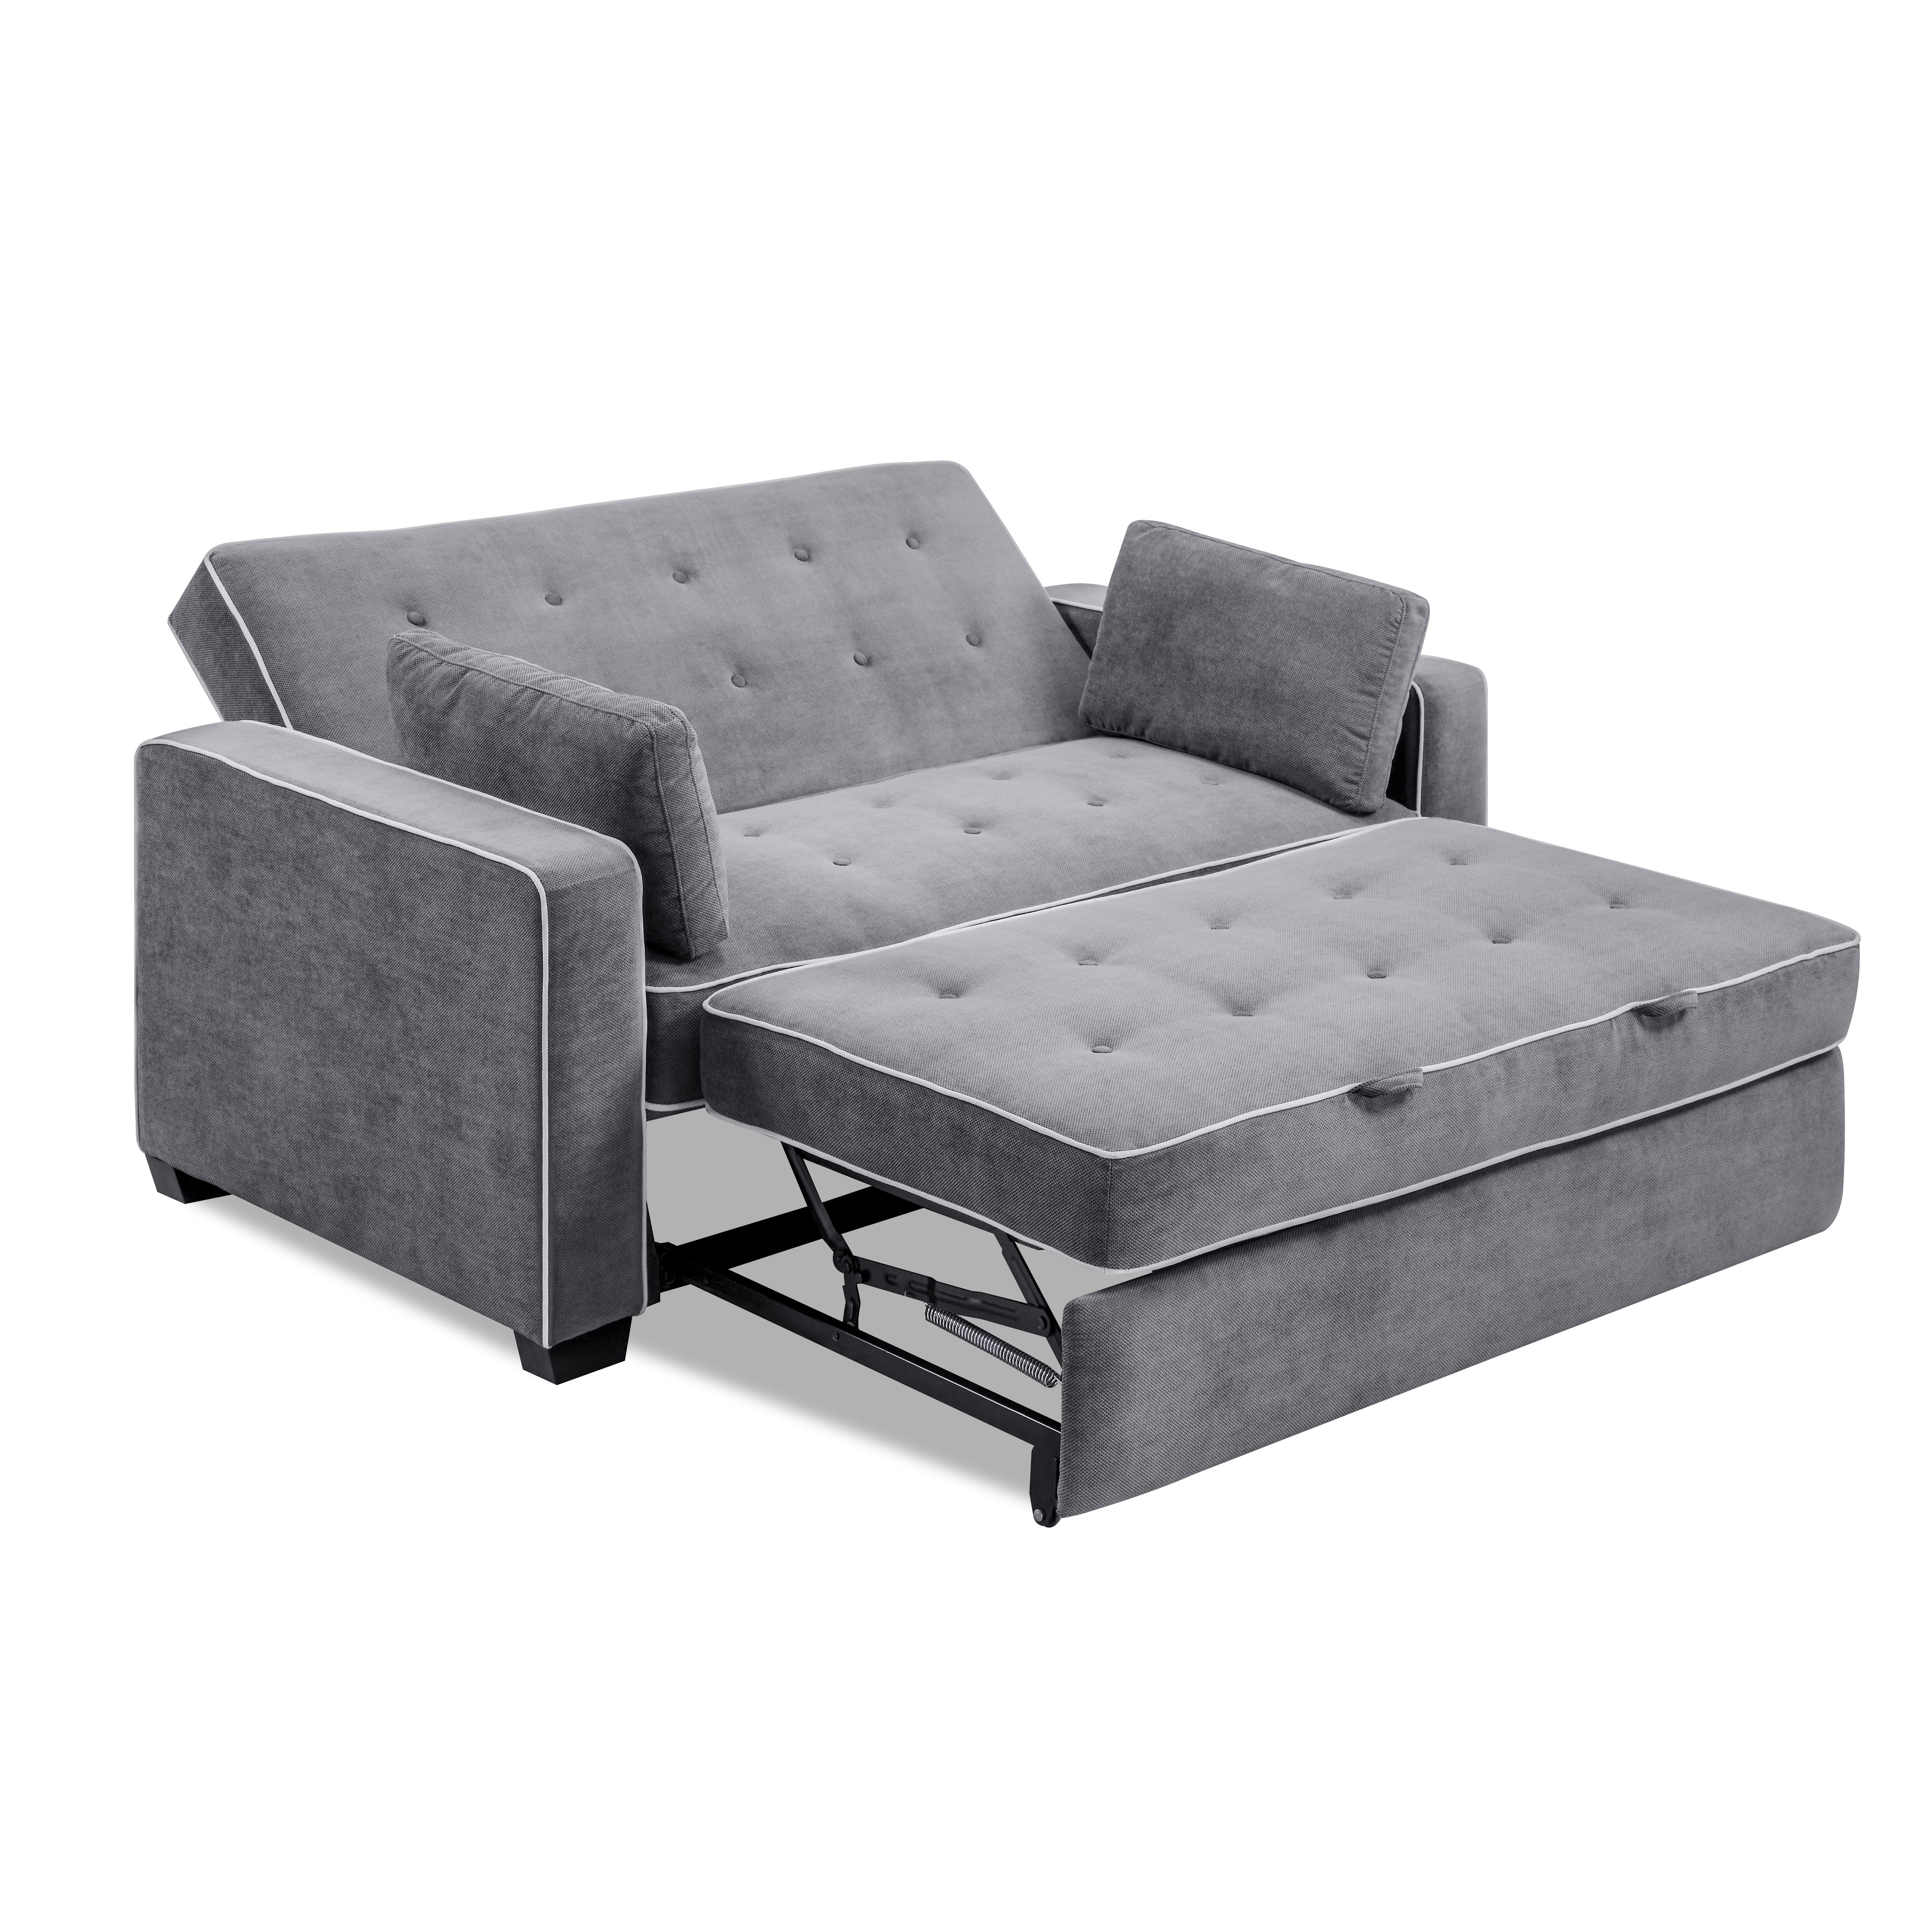 sofa bed pull out youu0027ll love the monroe sleeper sofa at wayfair - great deals on all ZNZXCHY